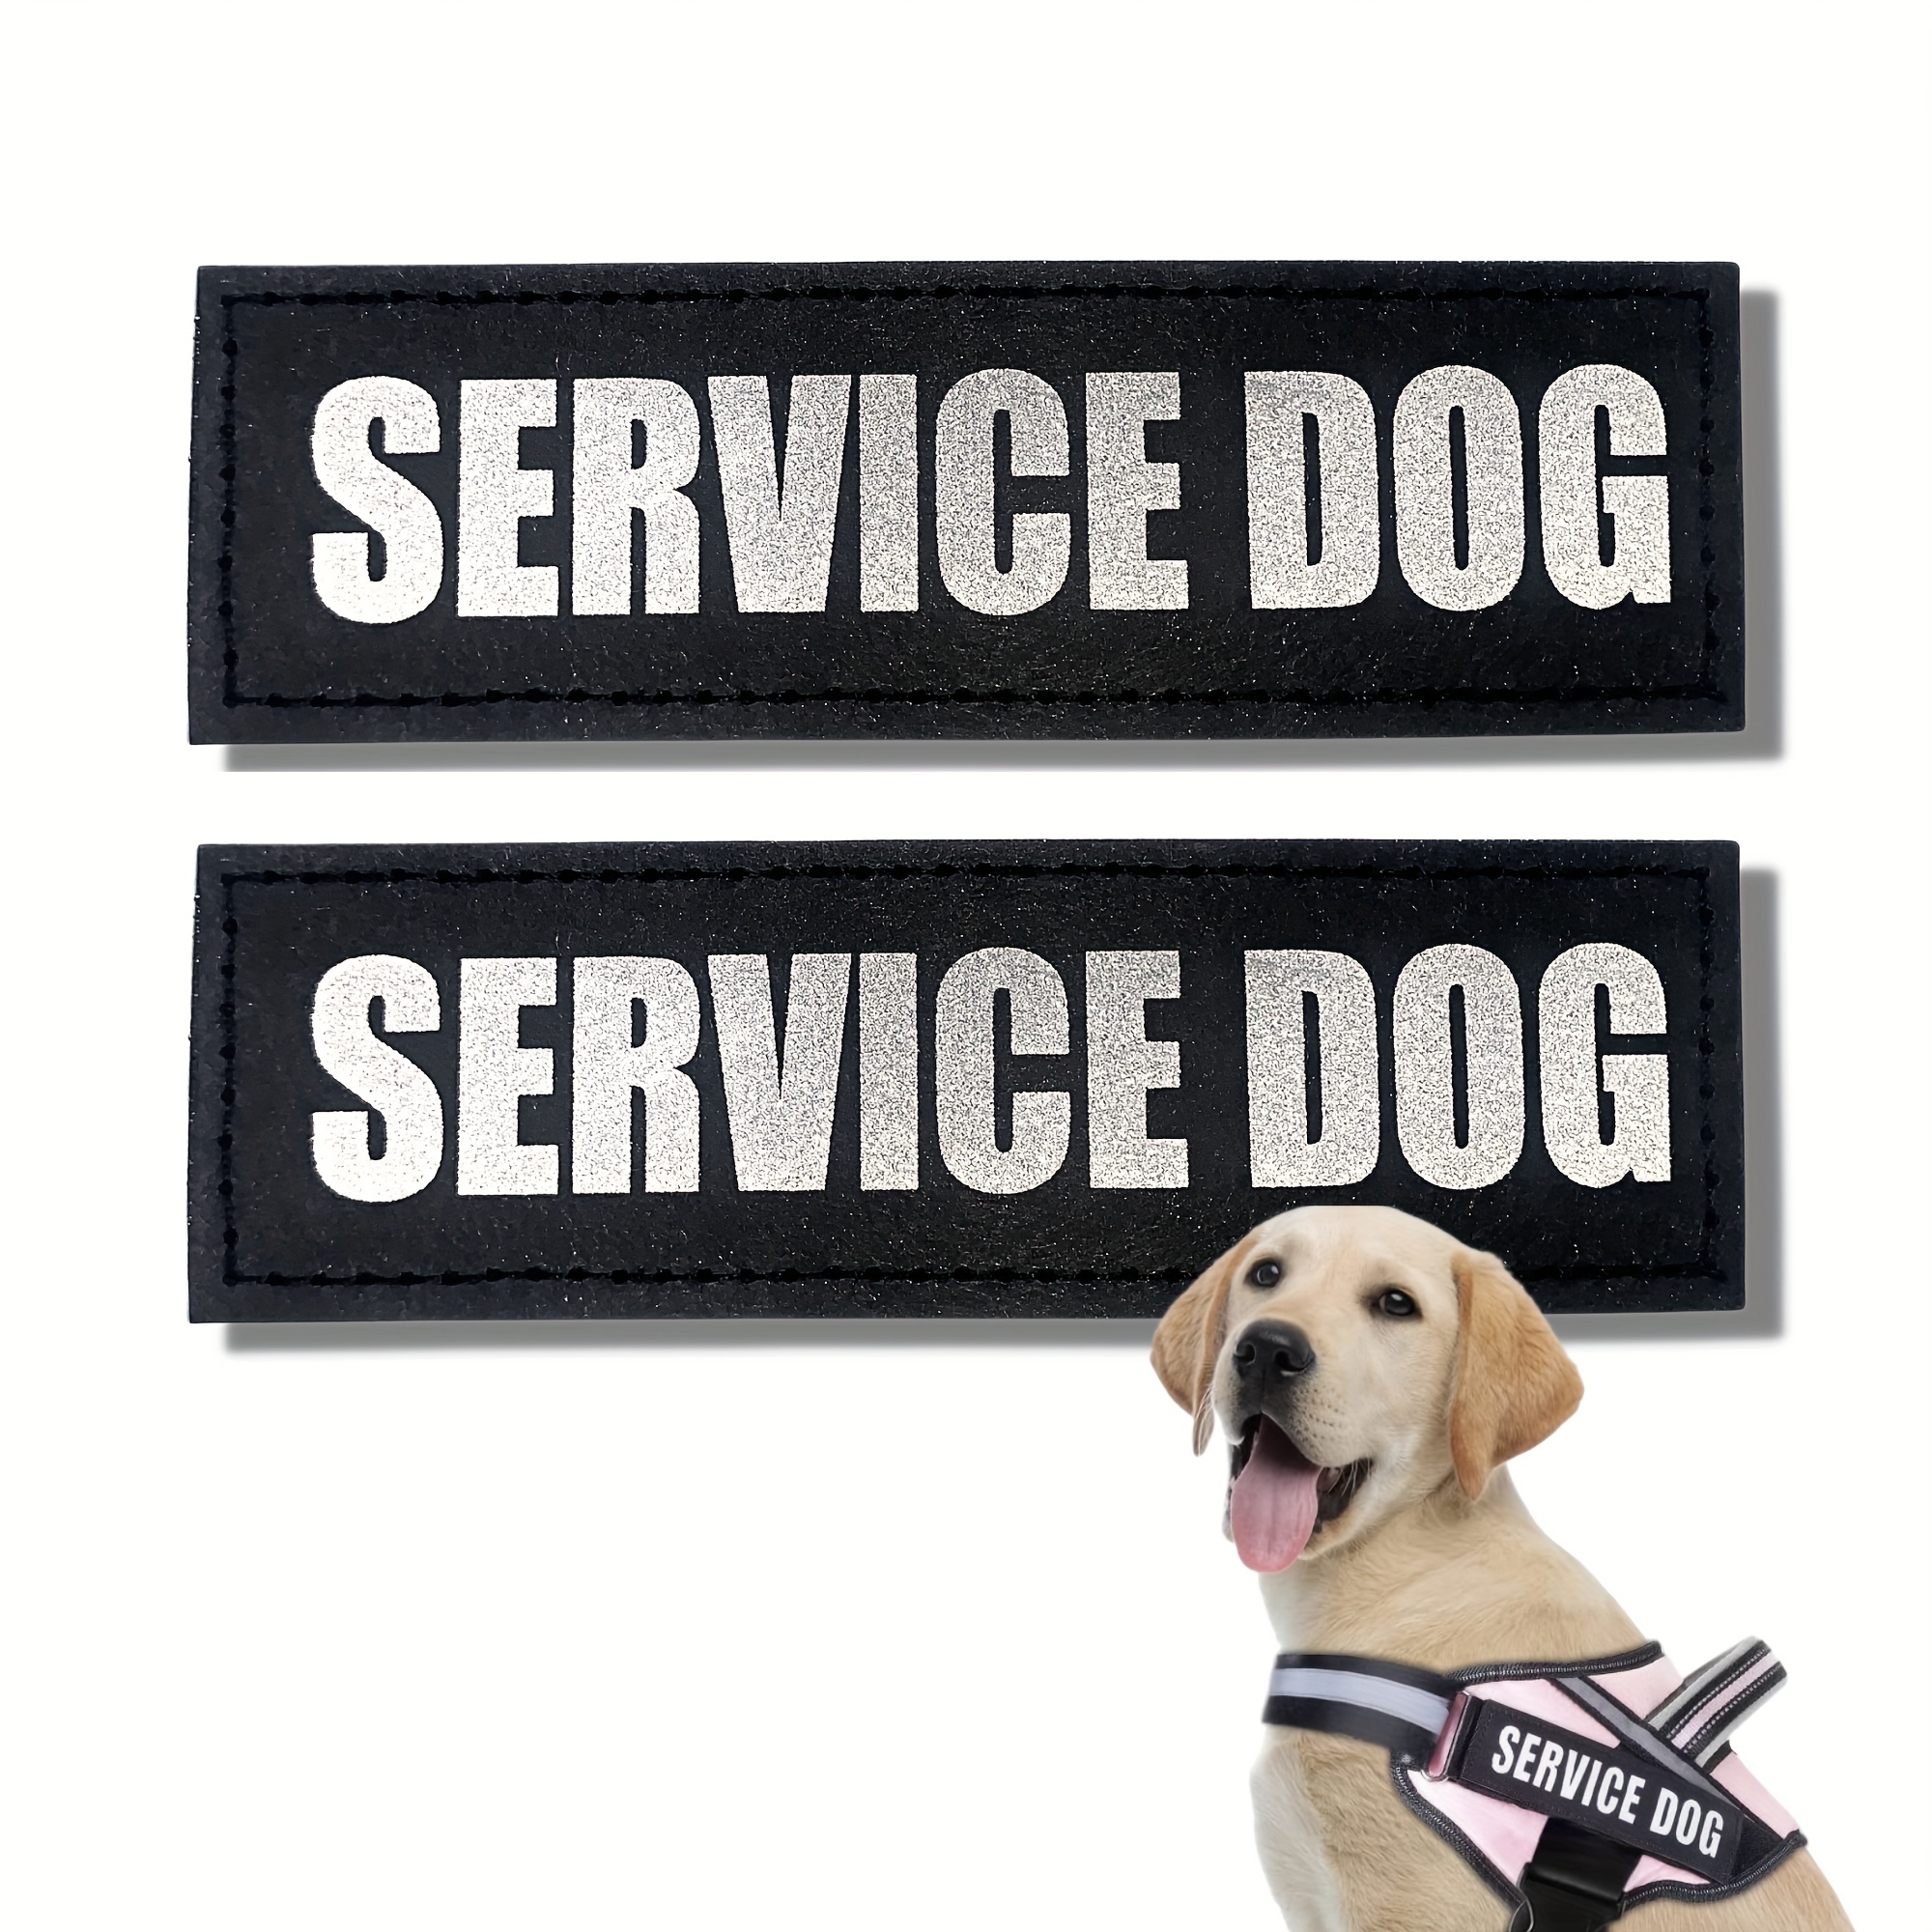 Patch, Embroidered Patch (Iron-On or Sew-On), Do Not Pet Service